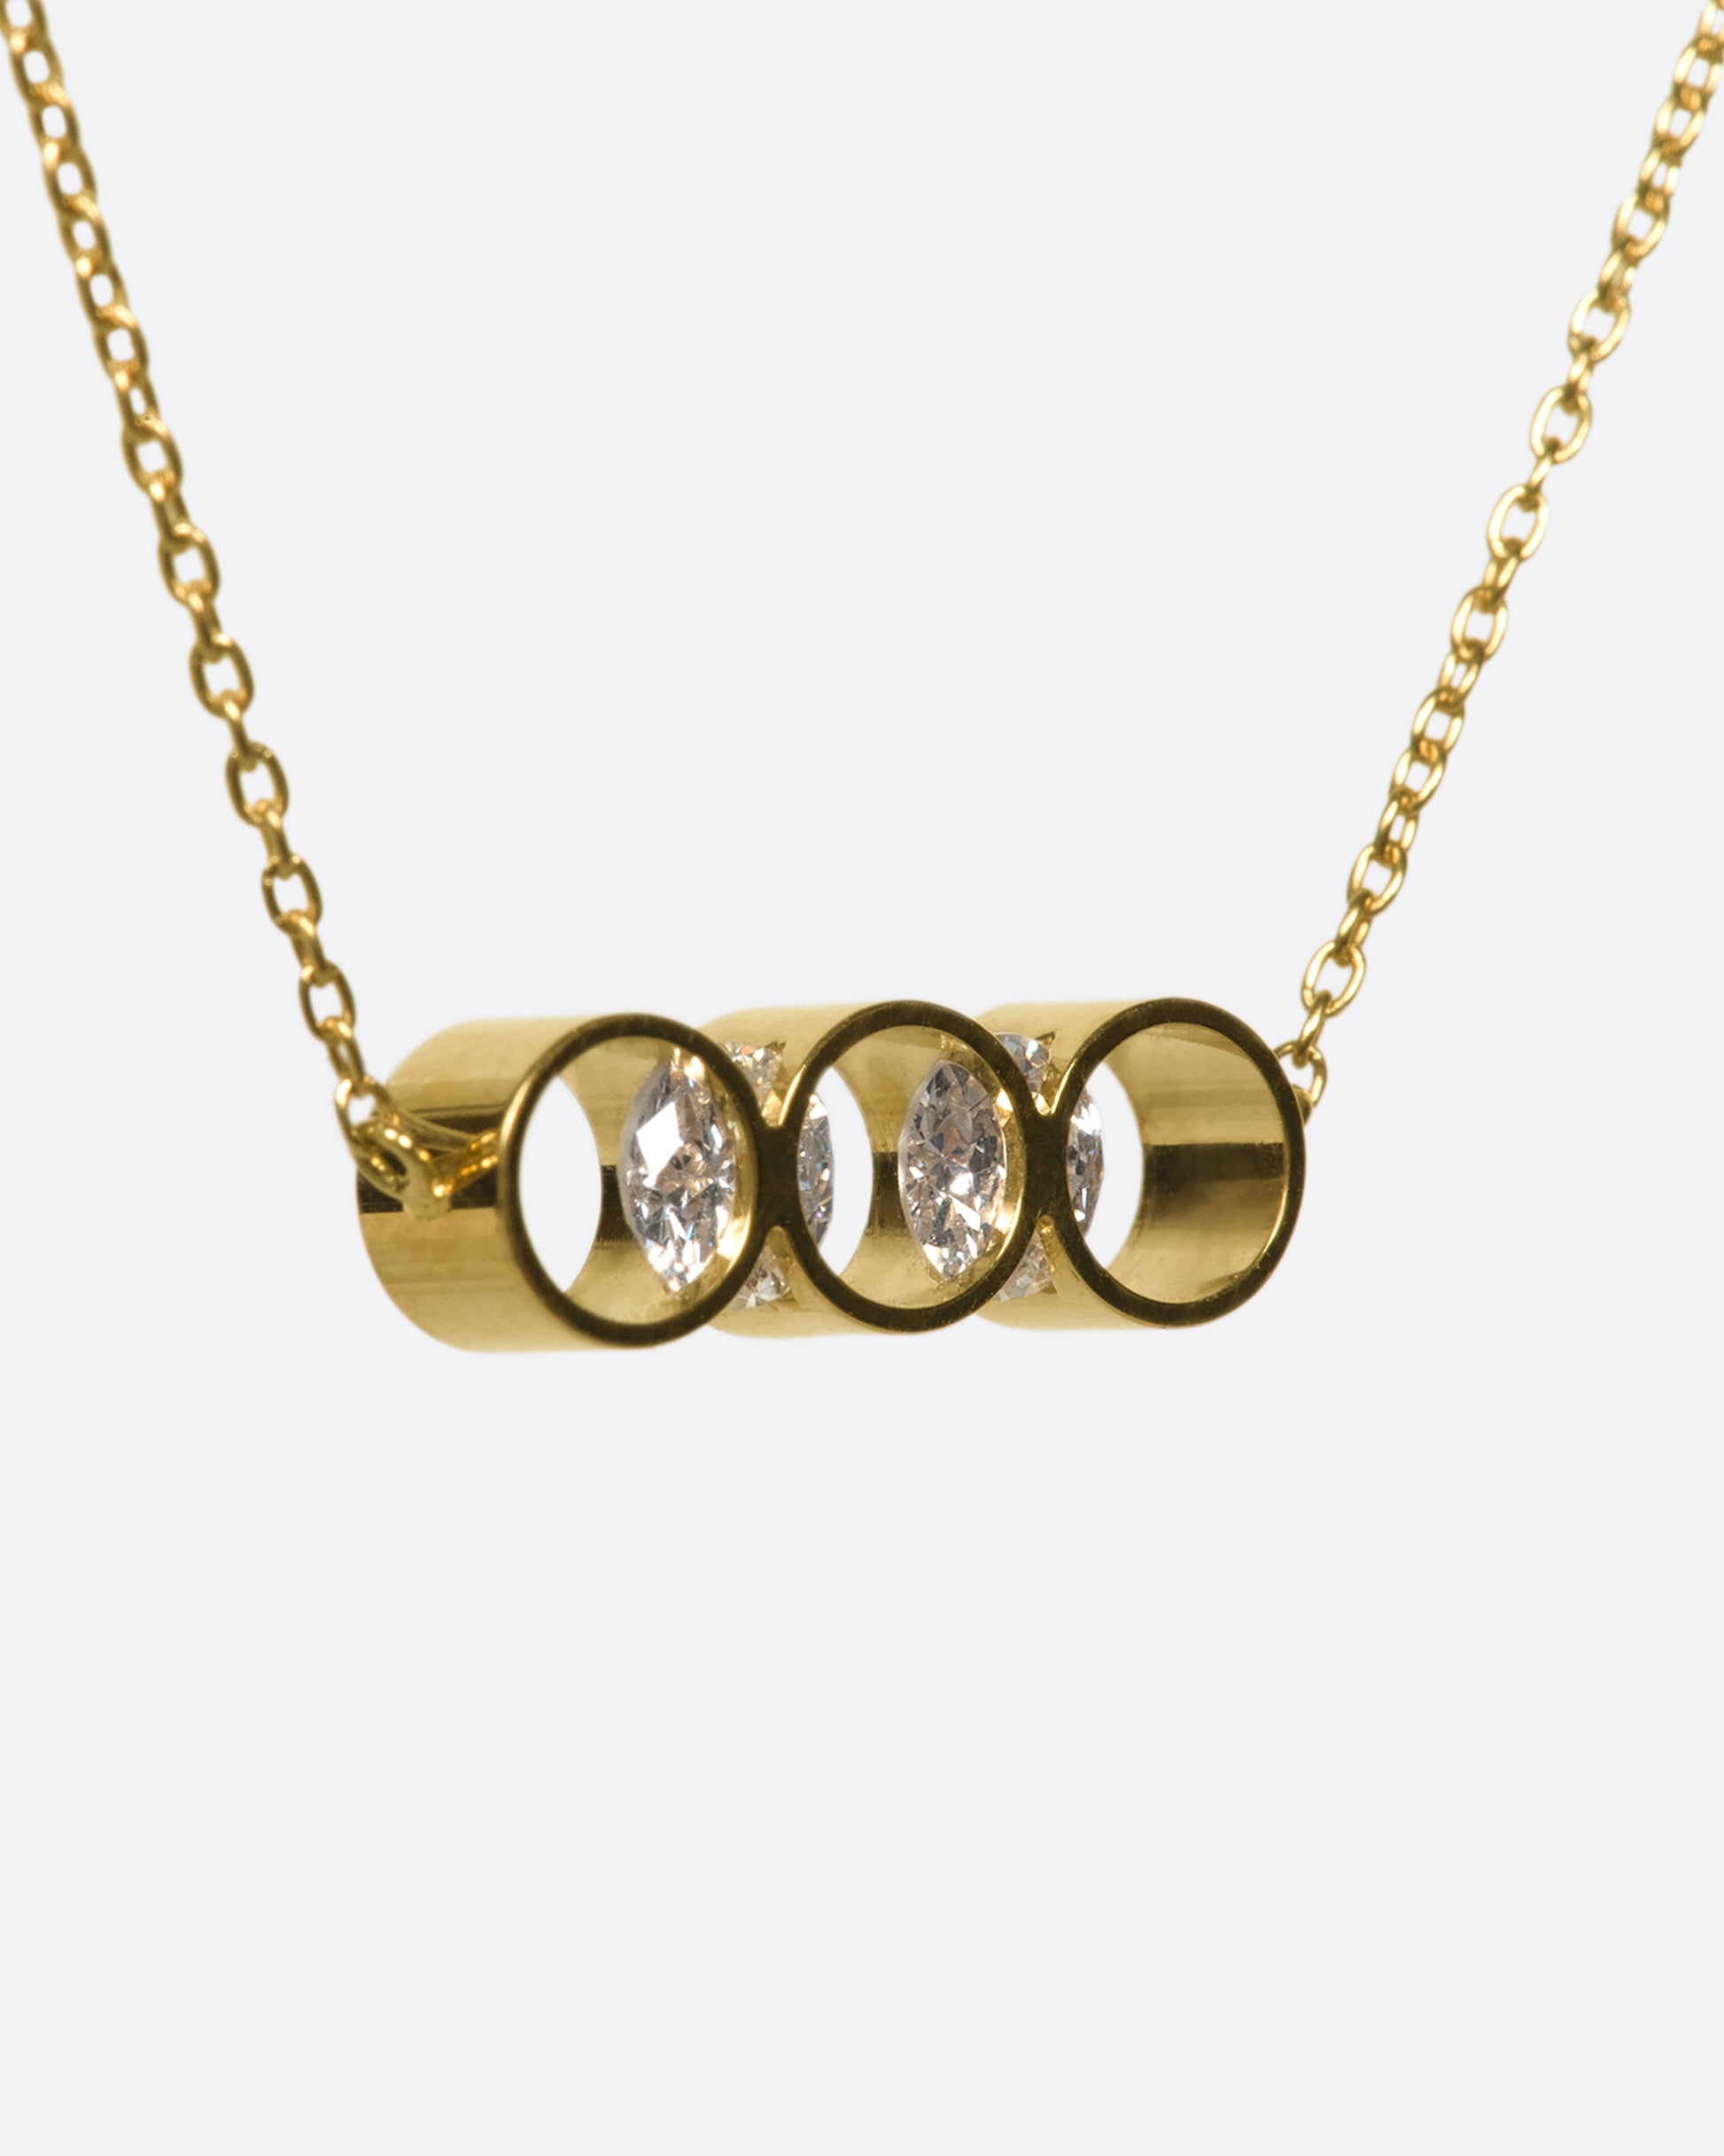 A gold necklace with two diamonds set into circular settings, from the side view.